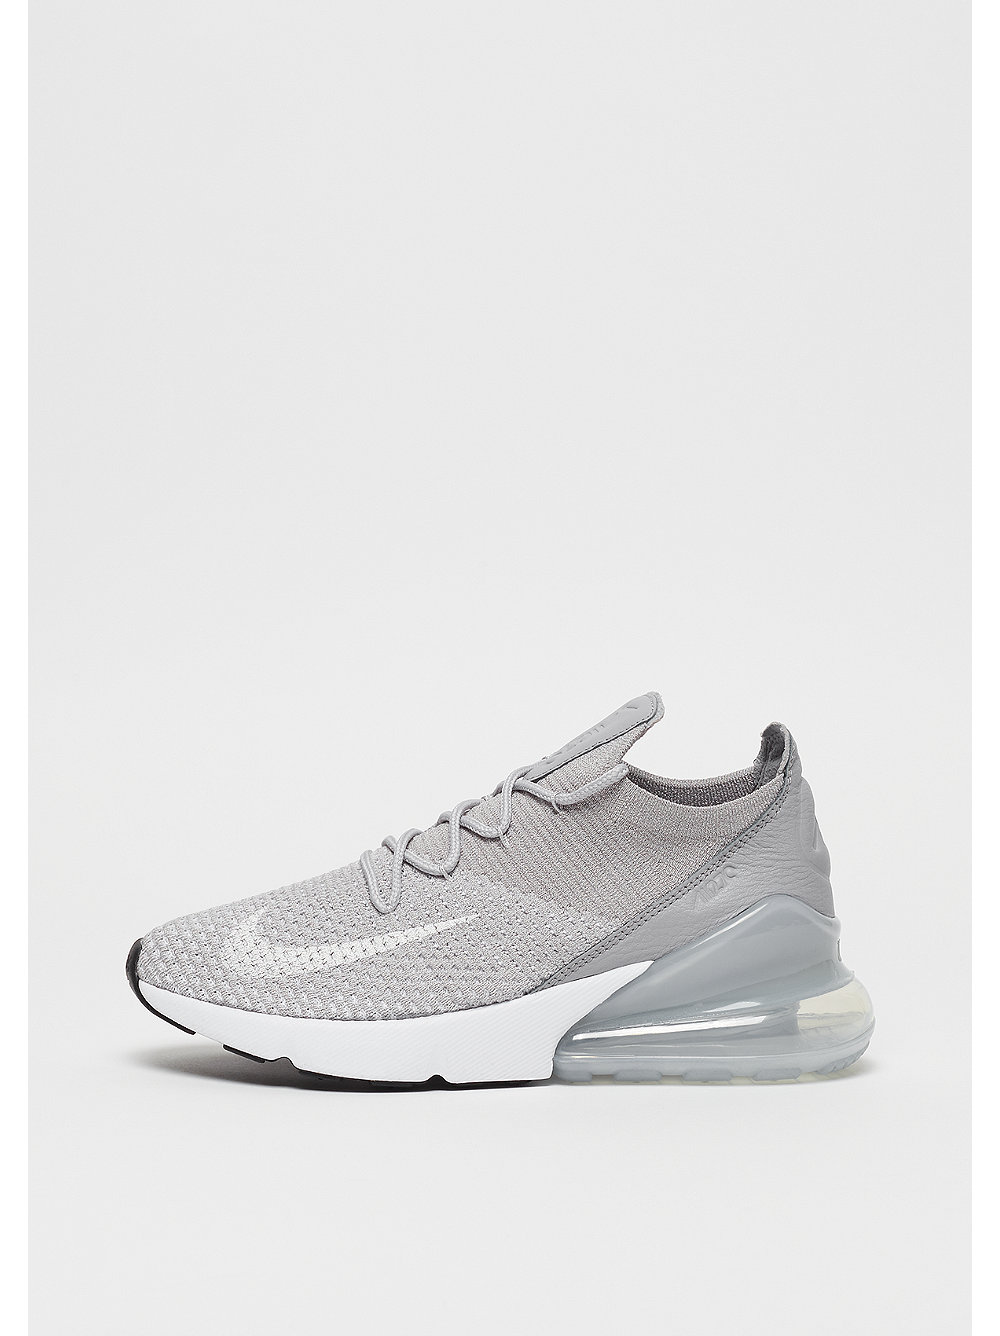 NIKE Wmns Air Max 270 Flyknit atmosphere grey/white-pure platinum